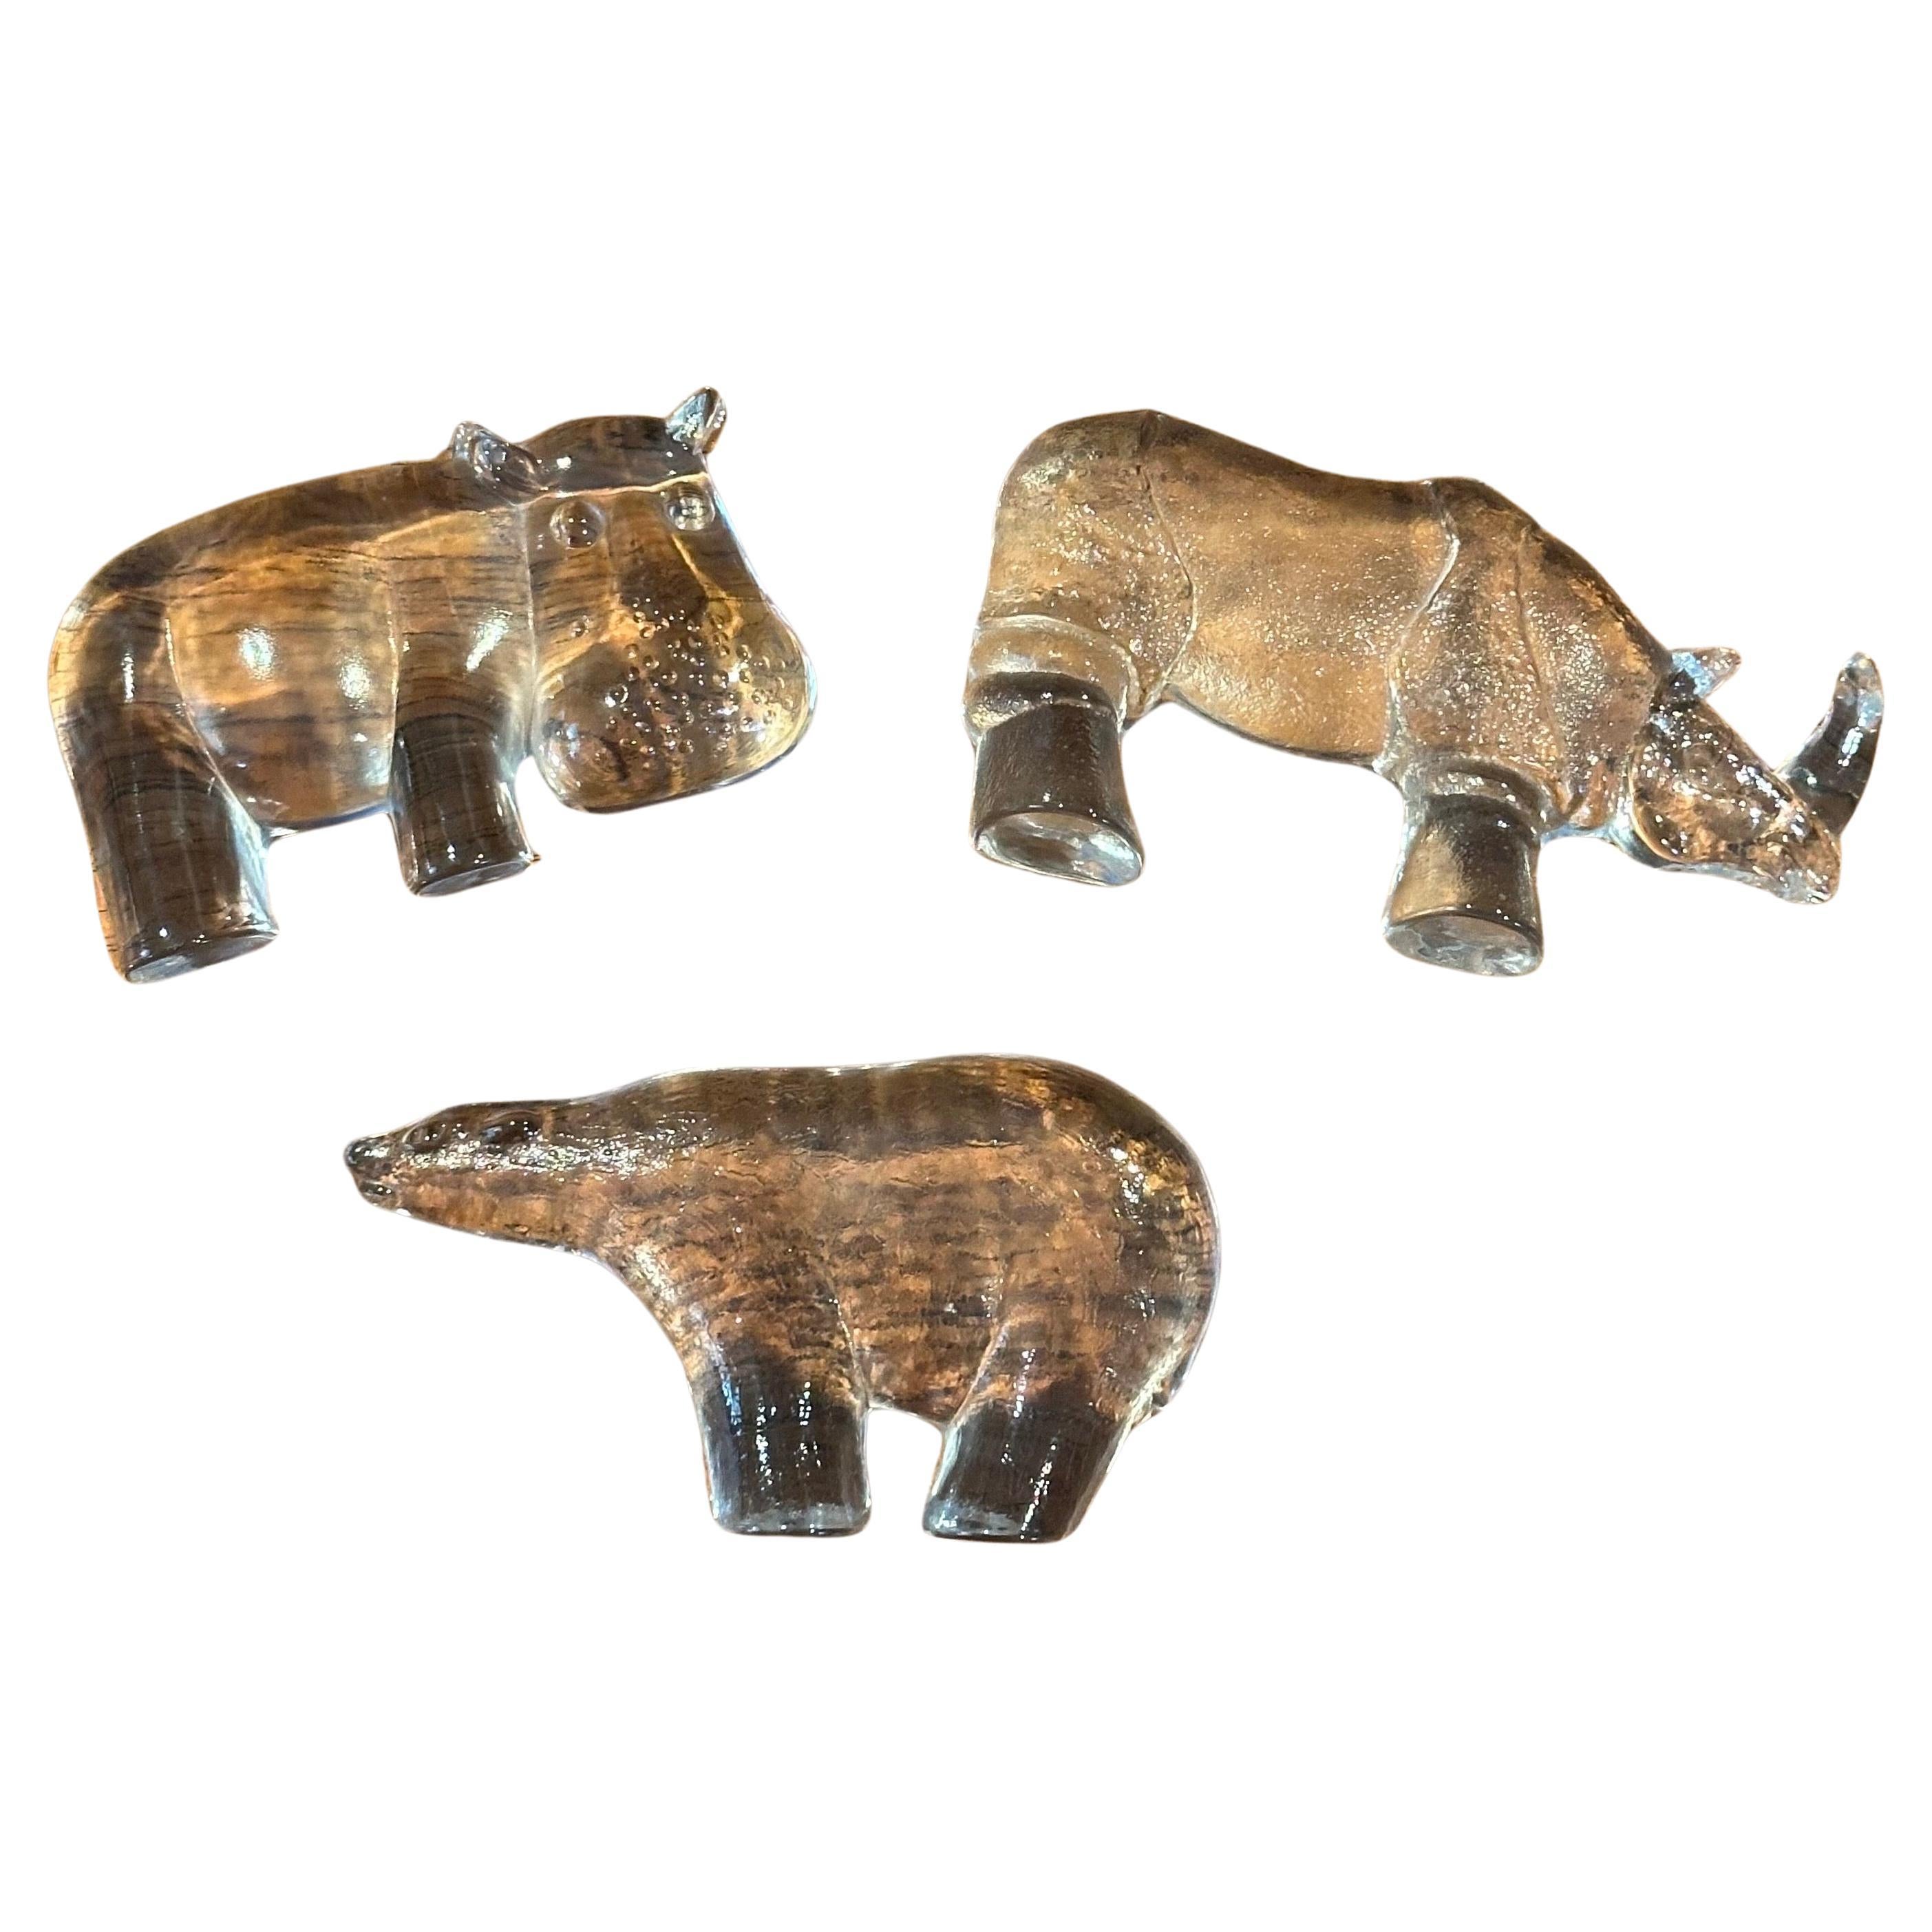 A very set of three art glass animal  paperweights / sculptures by Kosta Boda Sweden, circa 1980s. The set includes a hippo, rhino and polar bear.  They are in very good vintage condition with no chips or cracks and measures approximately 5